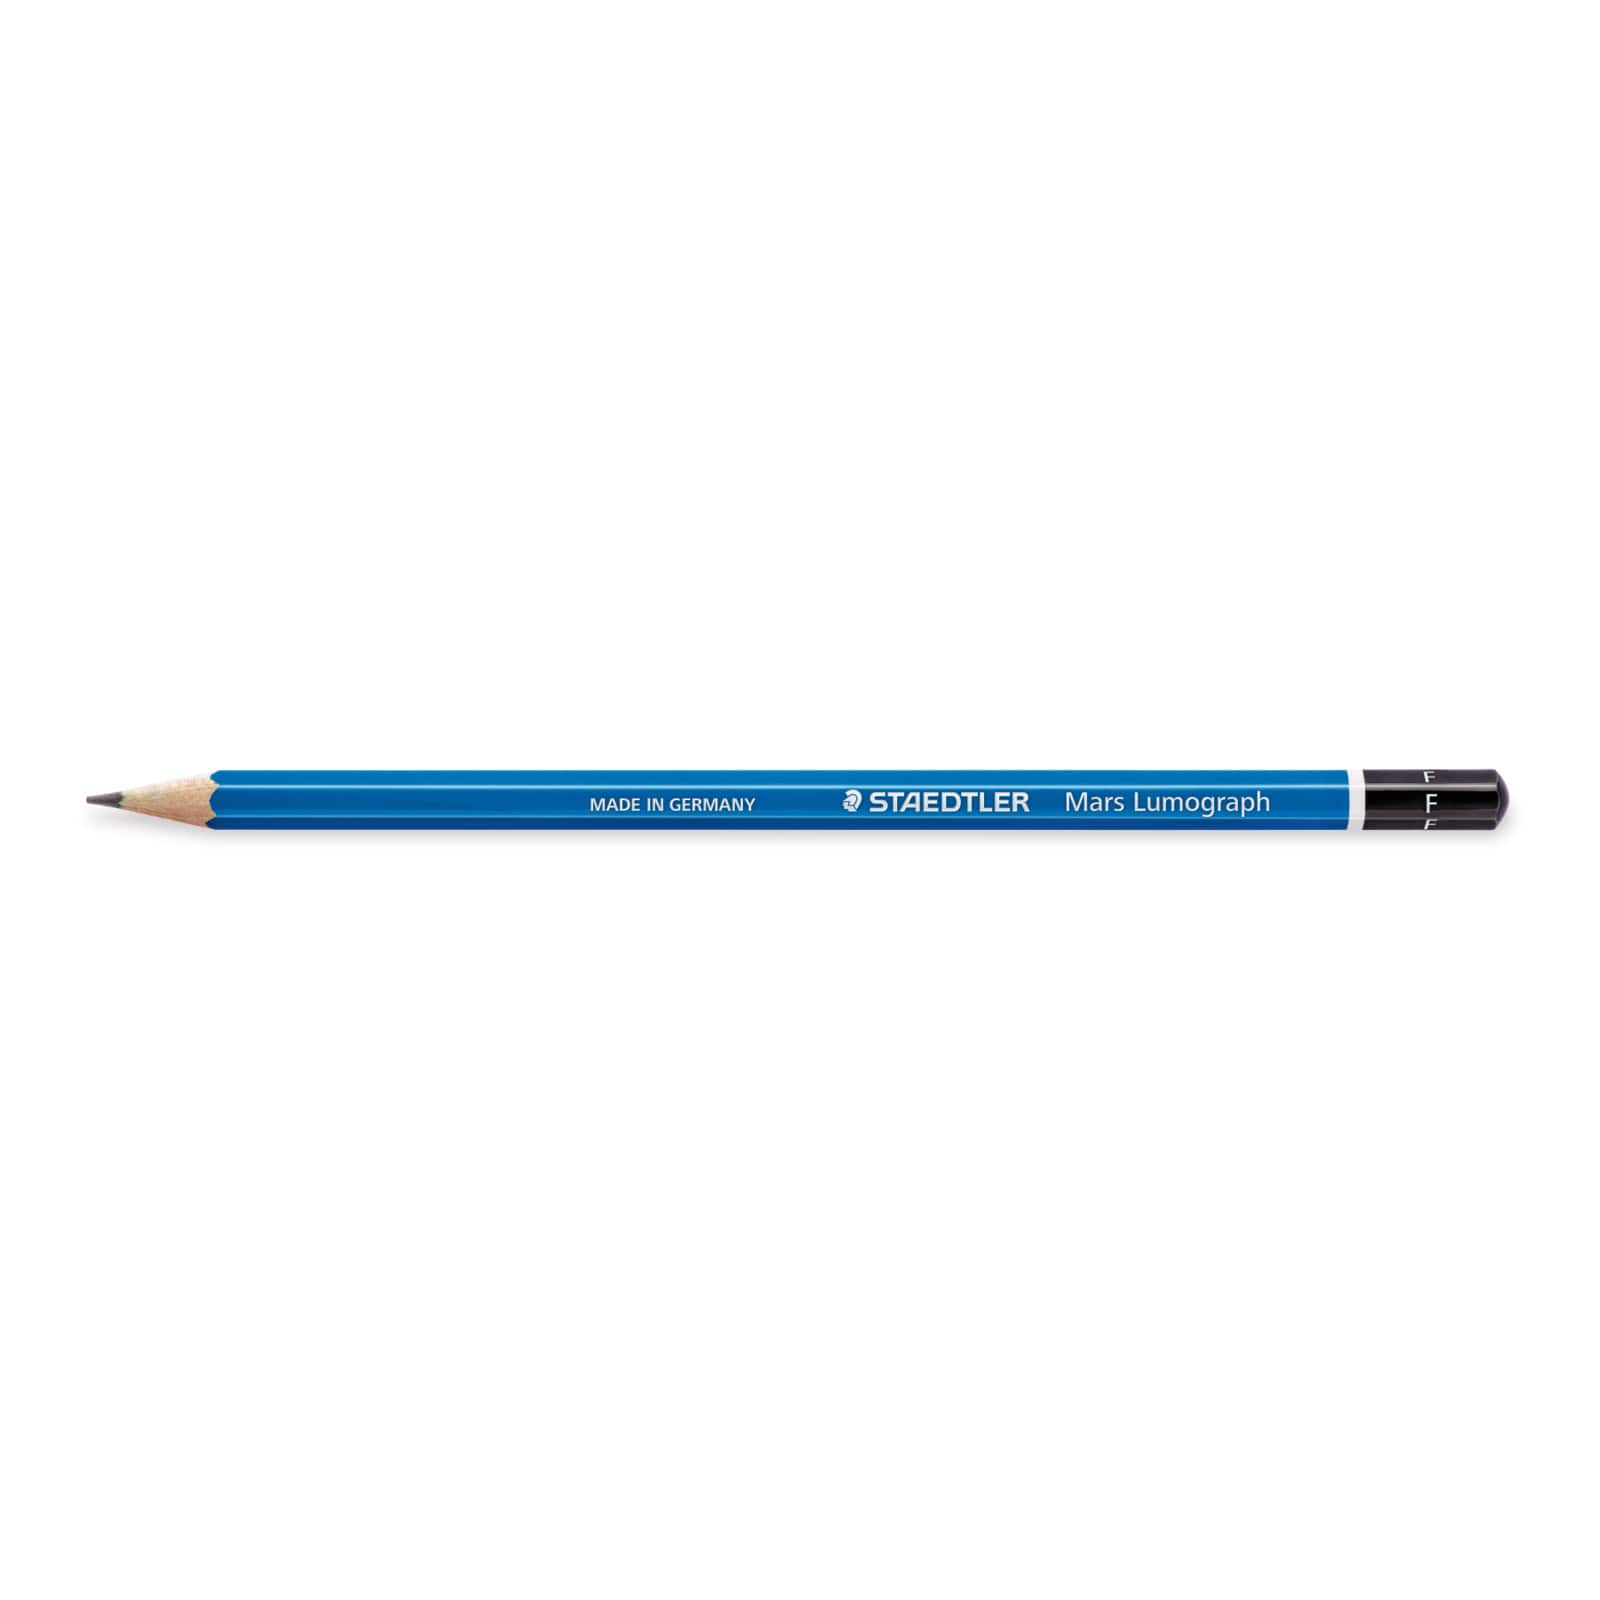 Staedtler: High-Quality Drafting & Art Supplies From Germany